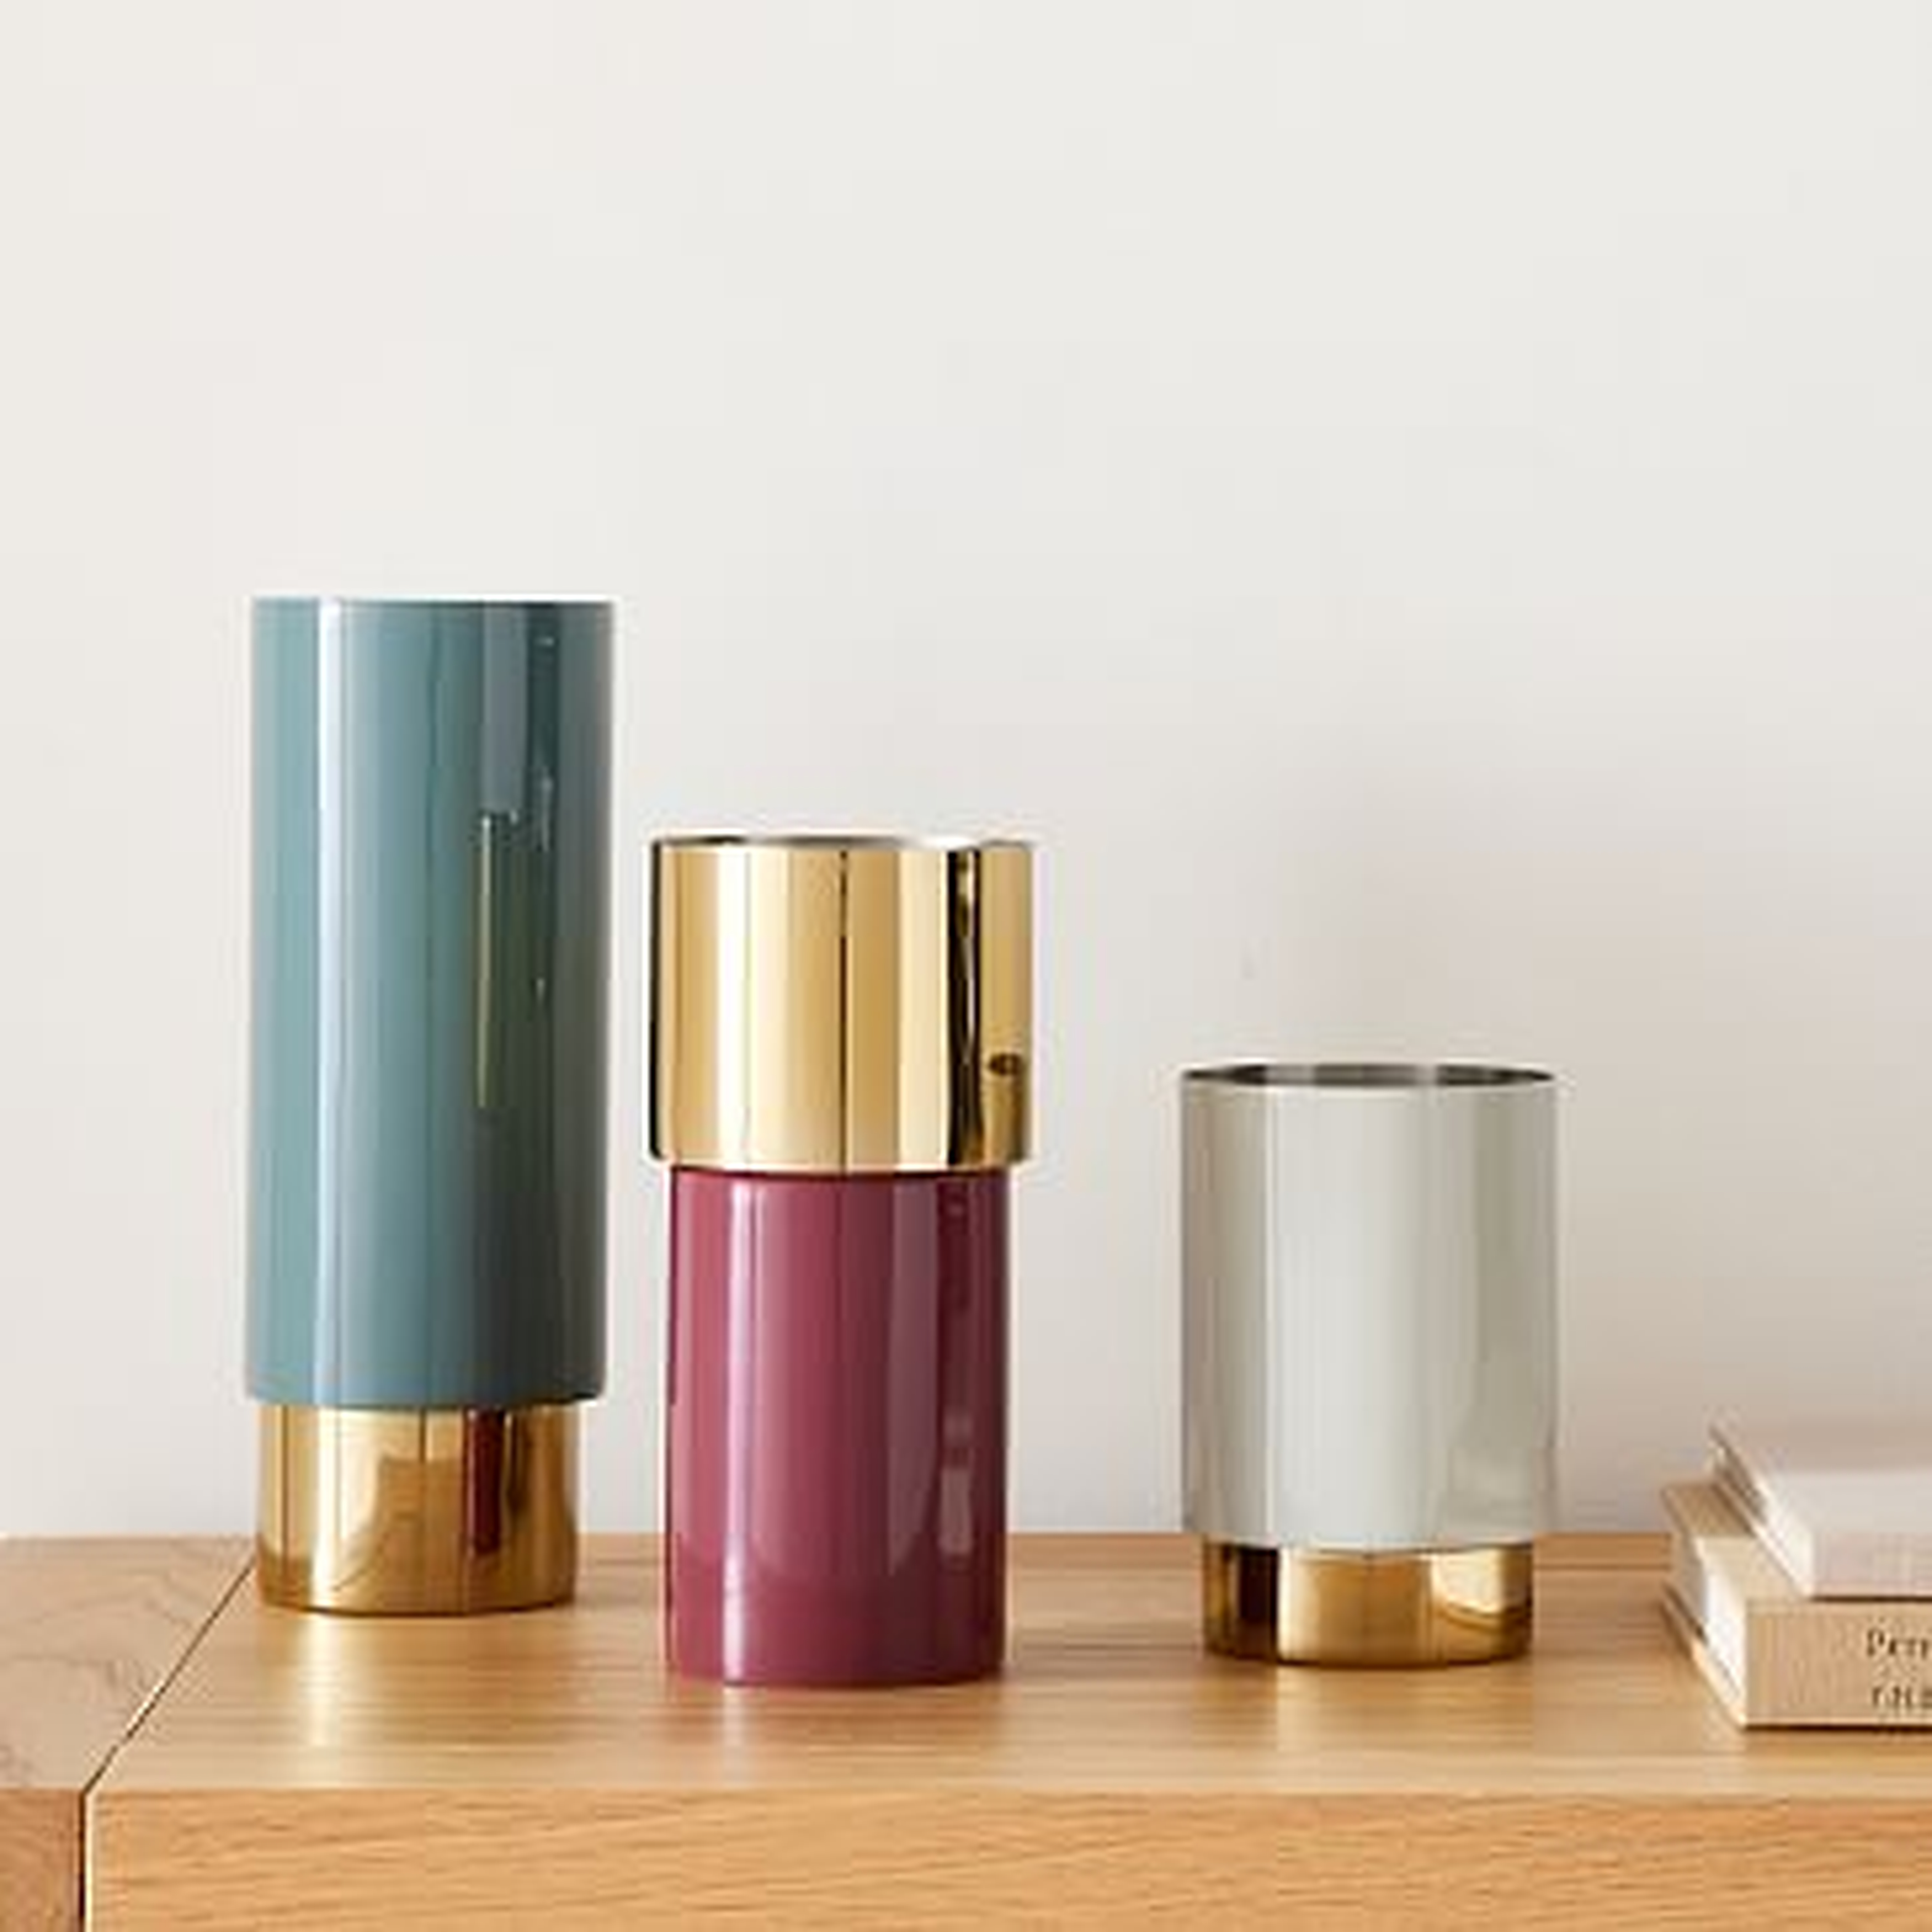 Brass And Enamel Tube Vase, Light Grey And Wine And Ocean, Small Medium And Large, Set of 3 - West Elm